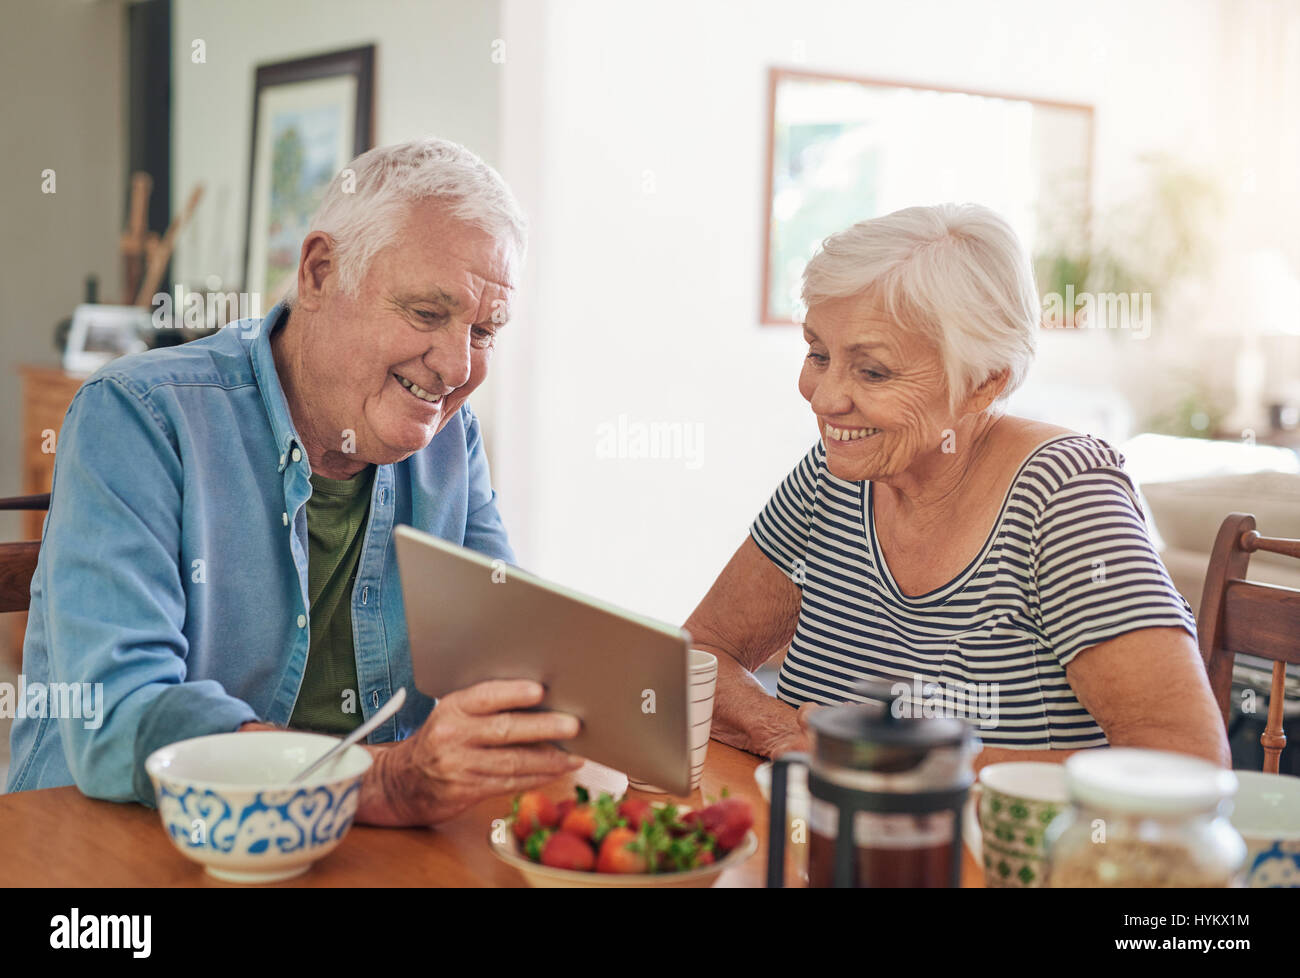 Smiling seniors using a digital tablet together over breakfast Stock Photo